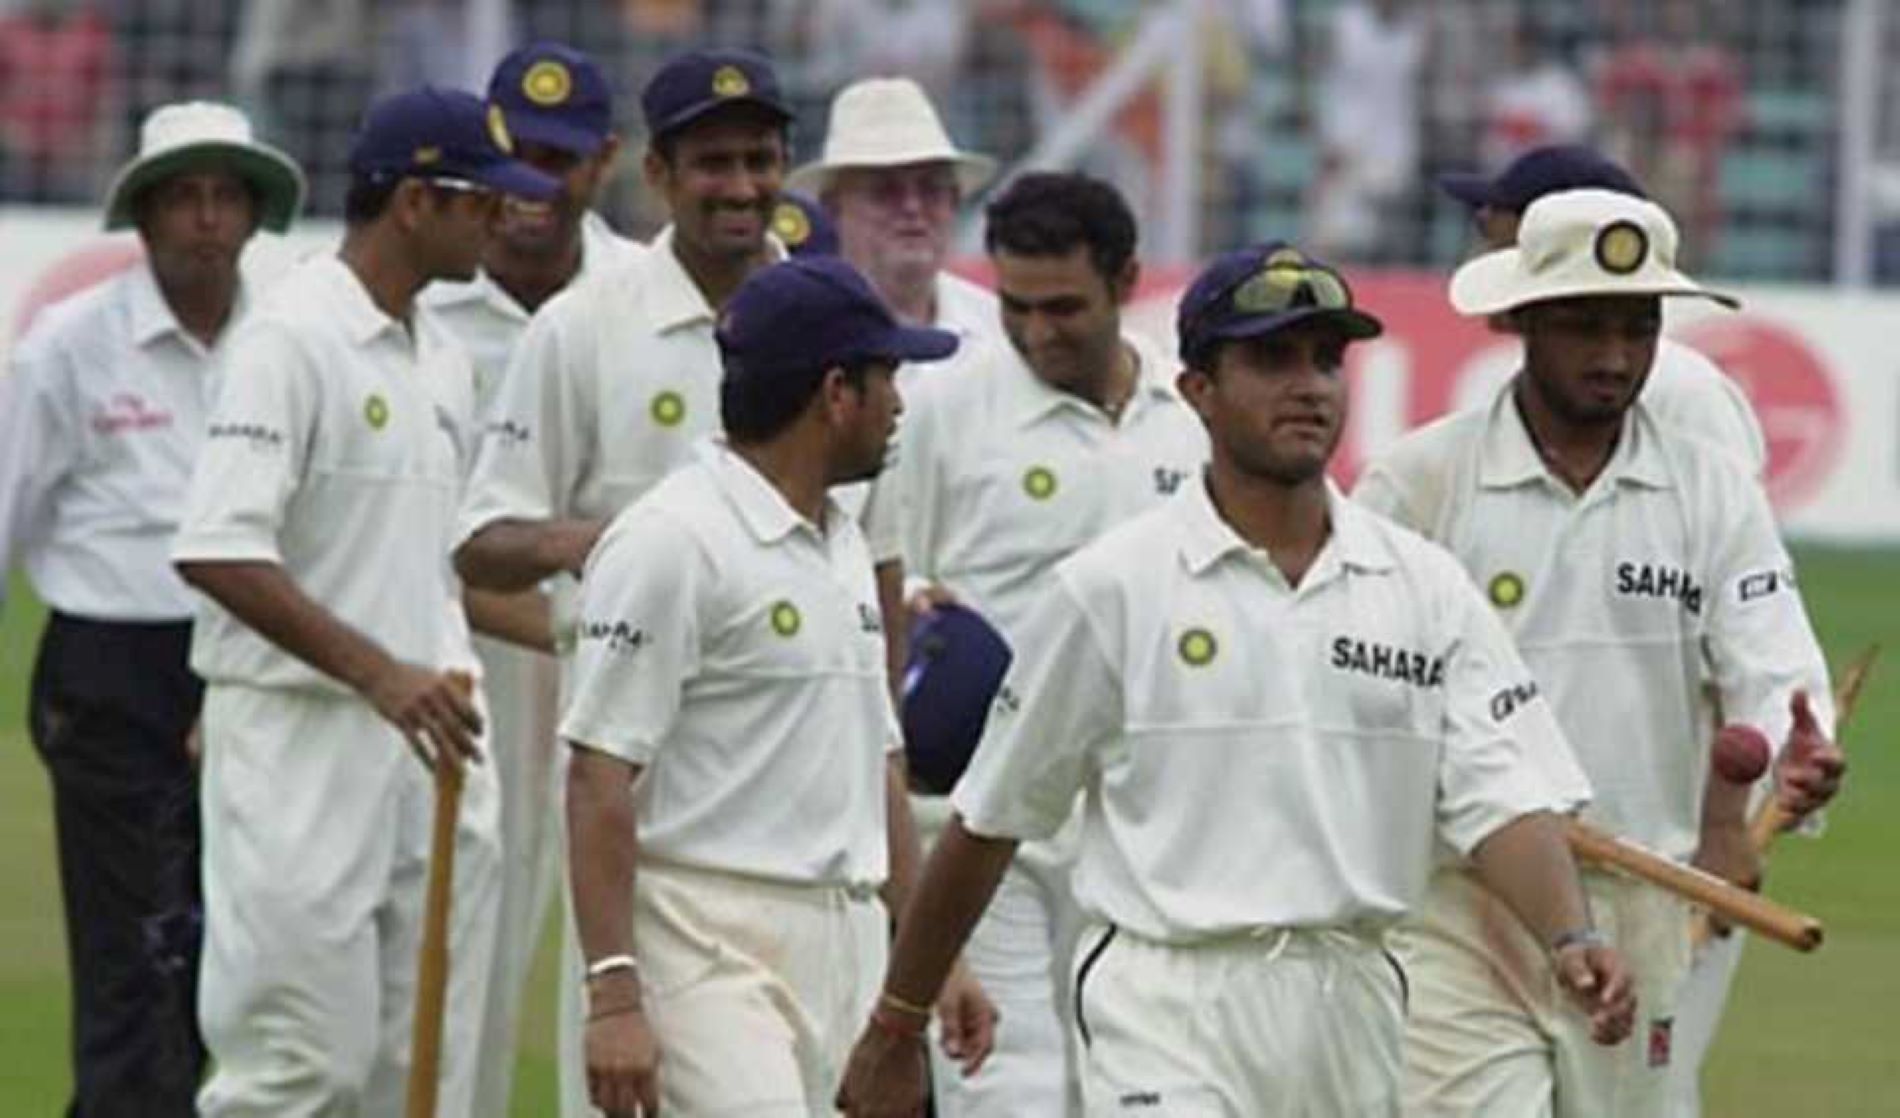 India have been dominating the West Indies in Tests since the early 2000s